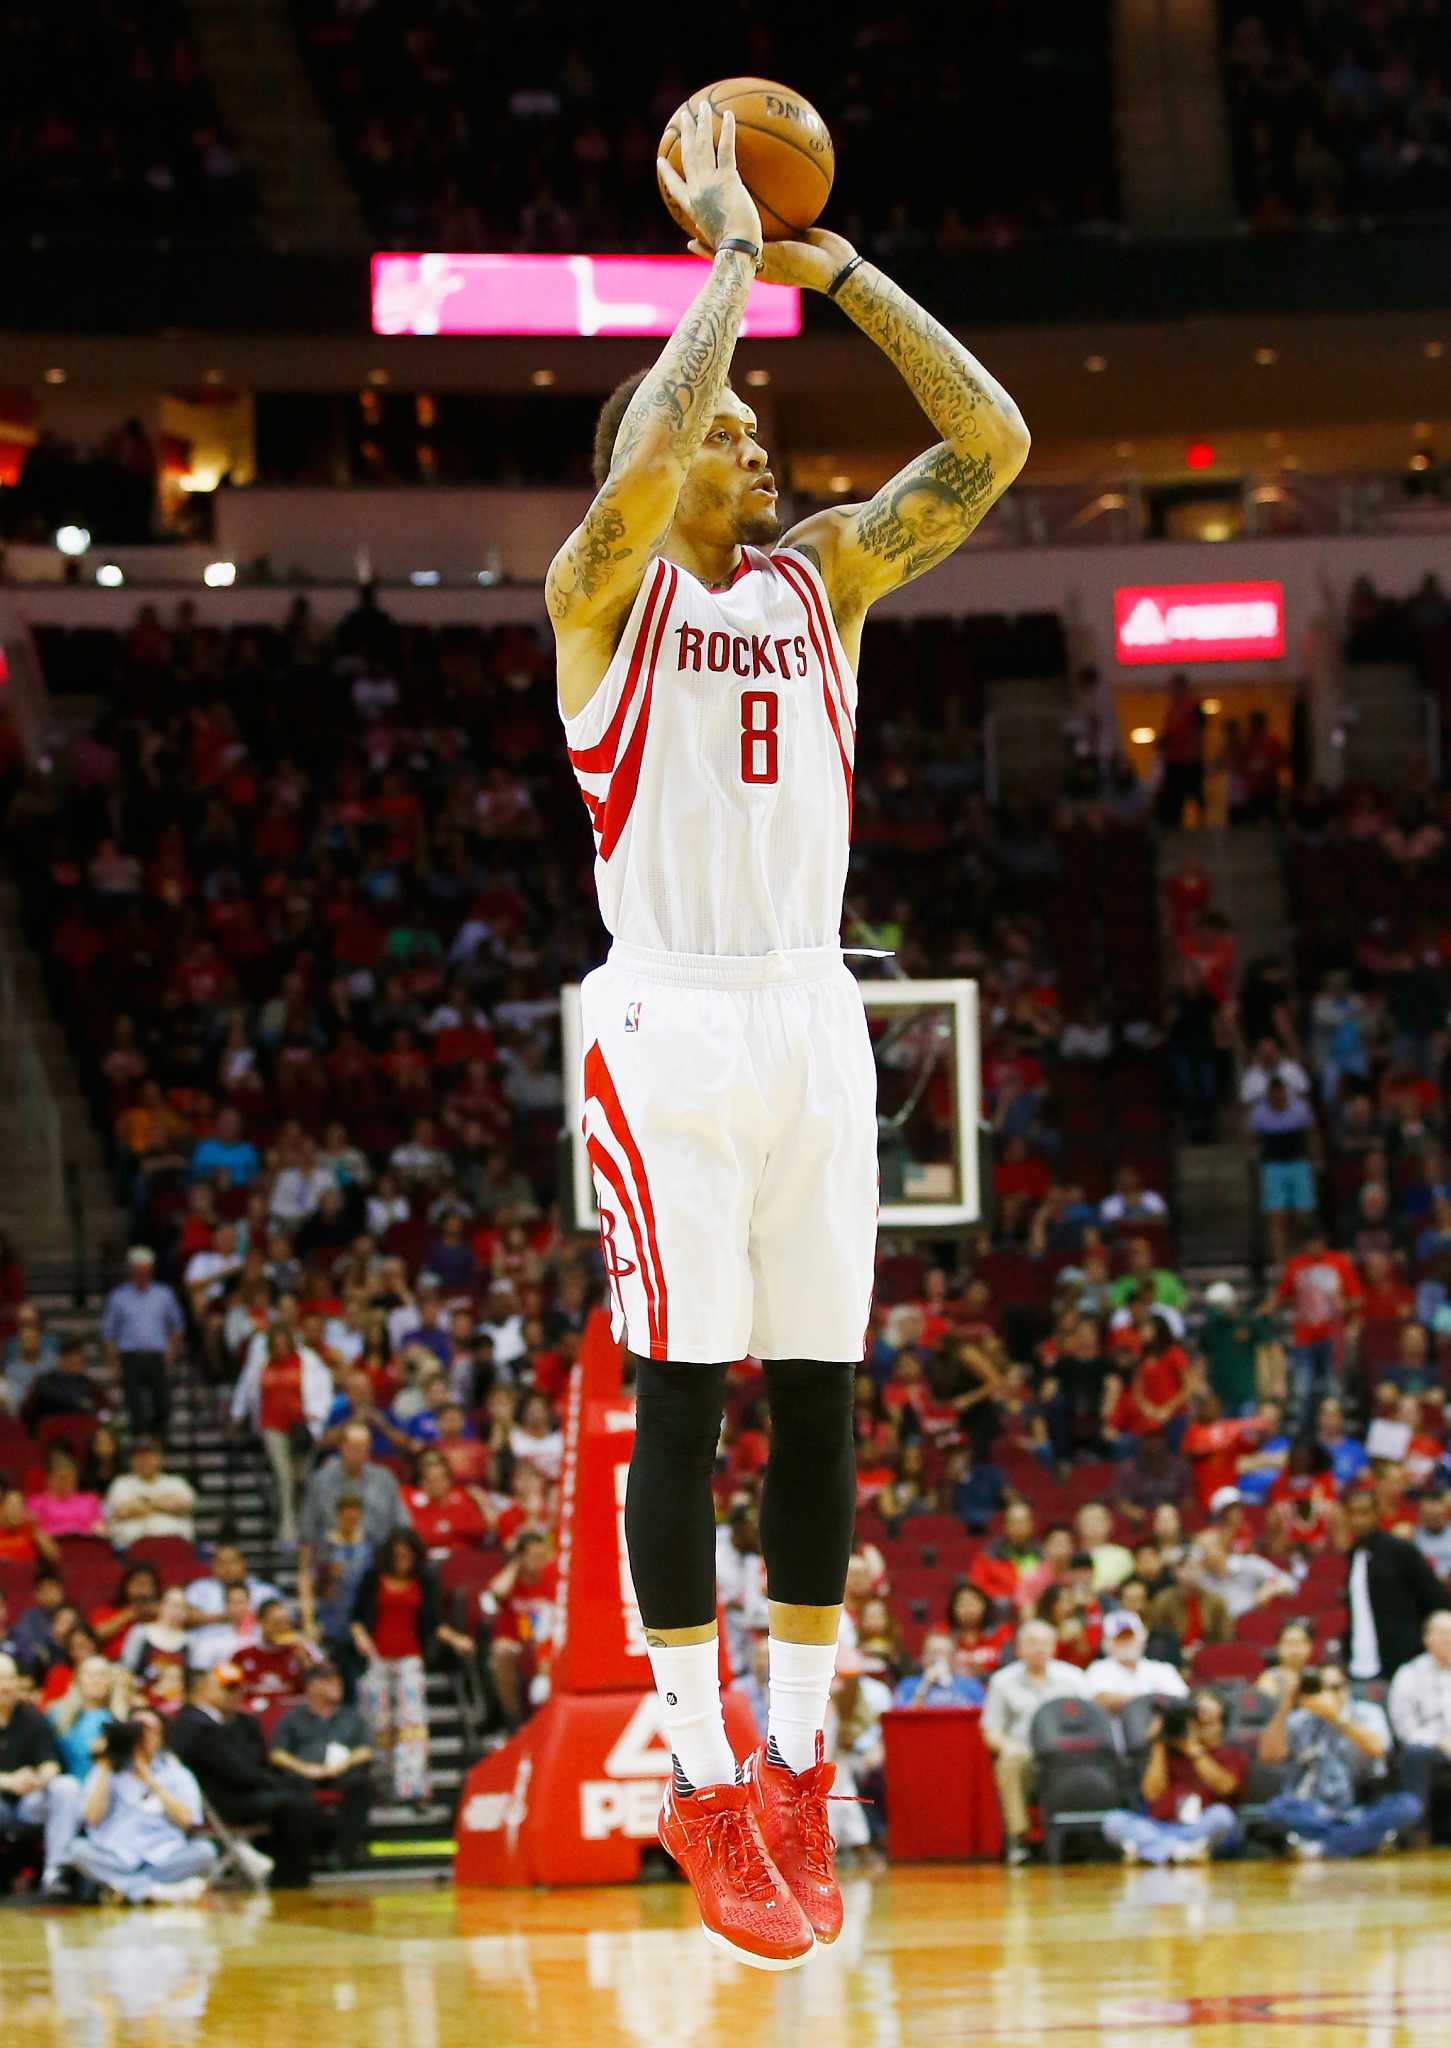 Rockets say Michael Beasley's focus is on career, family